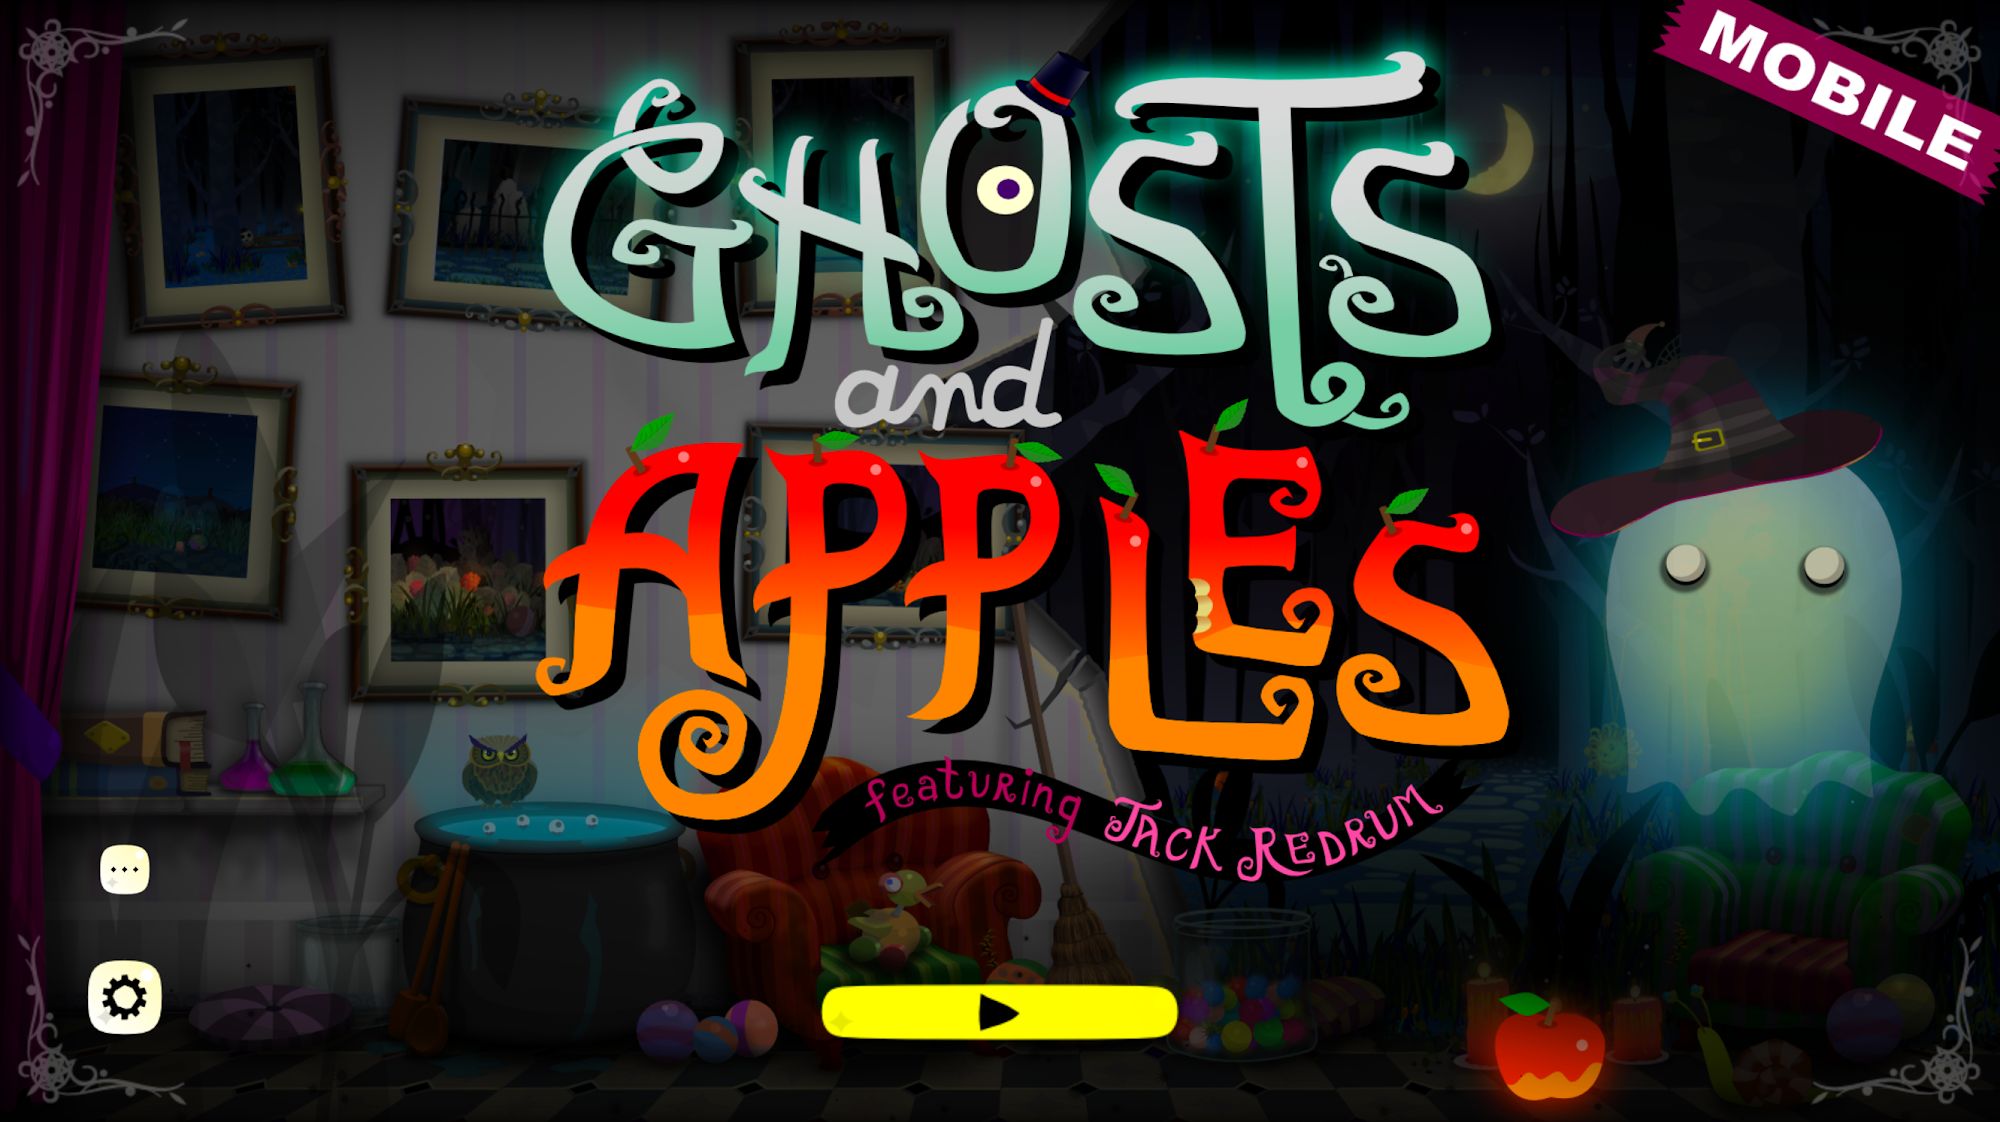 Baixar Ghosts and Apples Mobile para Android grátis.